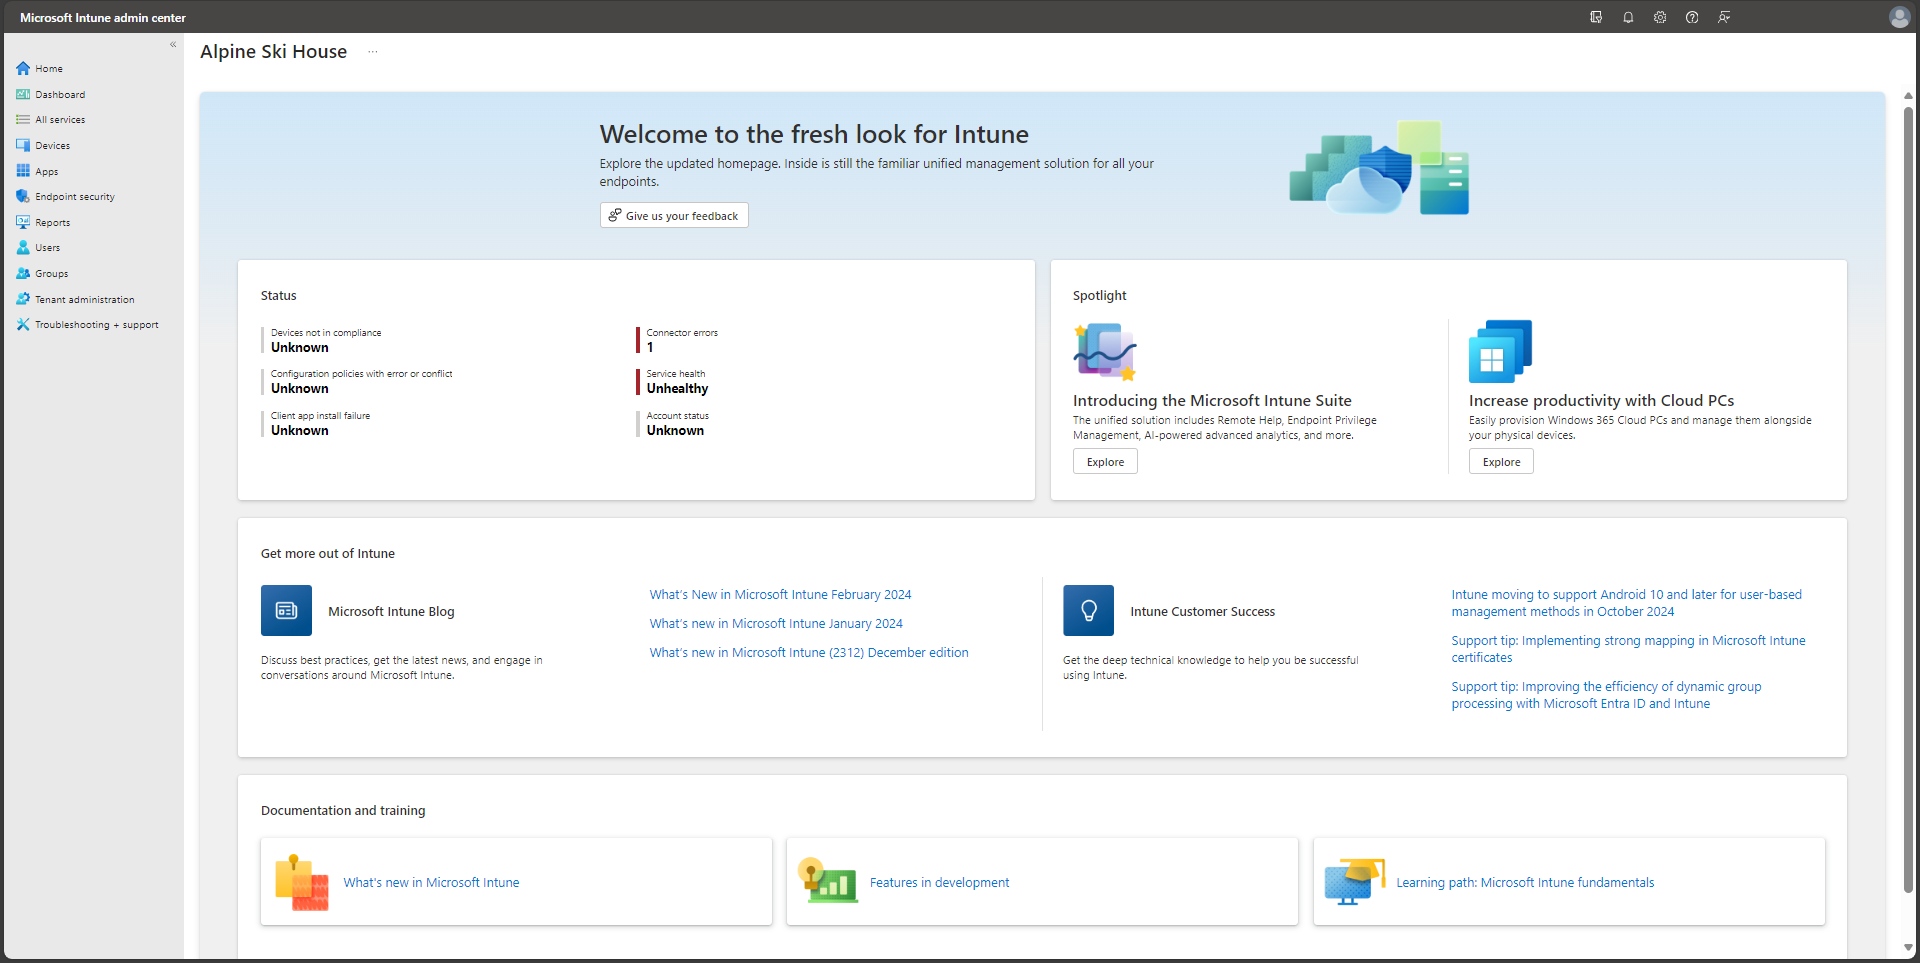 Screenshot of the Microsoft Intune admin center - Home page